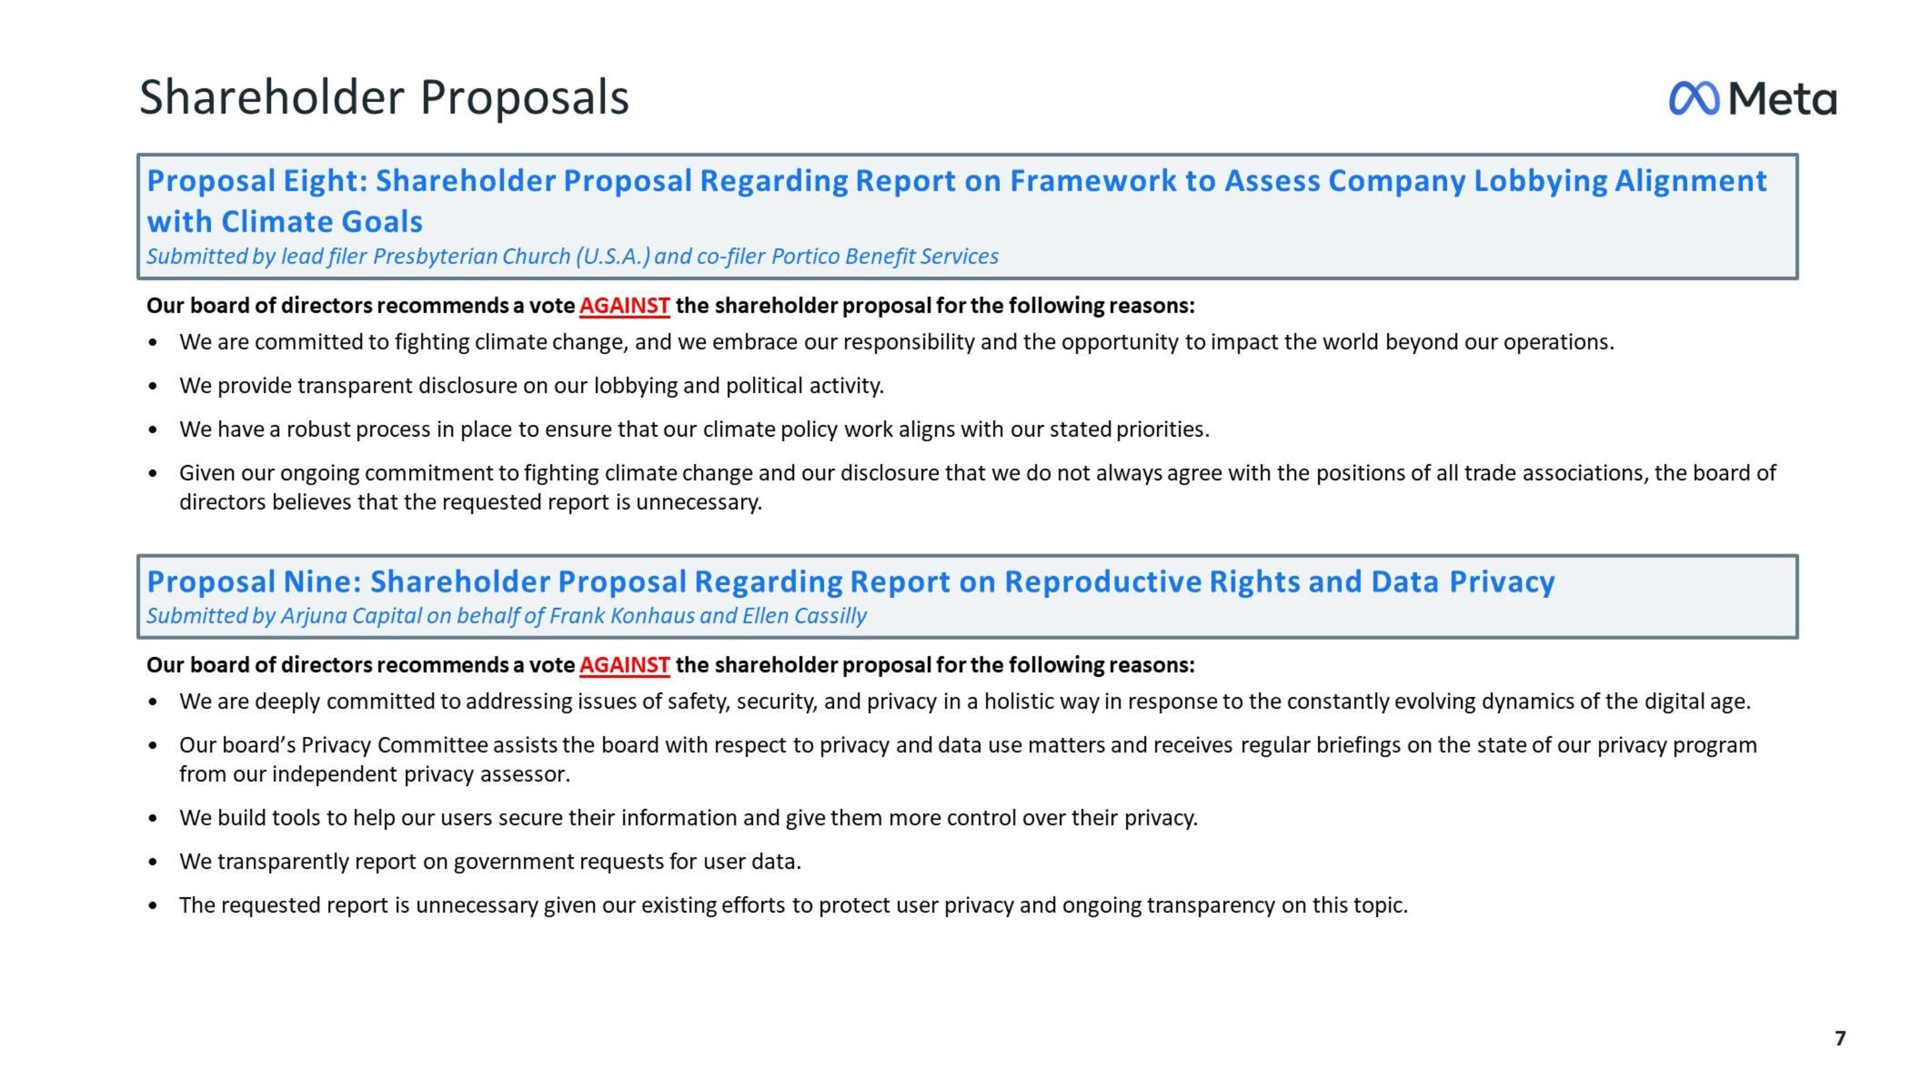 shareholder proposals meta proposal eight shareholder proposal regarding report on framework to assess company lobbying alignment with climate goals proposal nine shareholder proposal regarding report on reproductive rights and data privacy | Meta